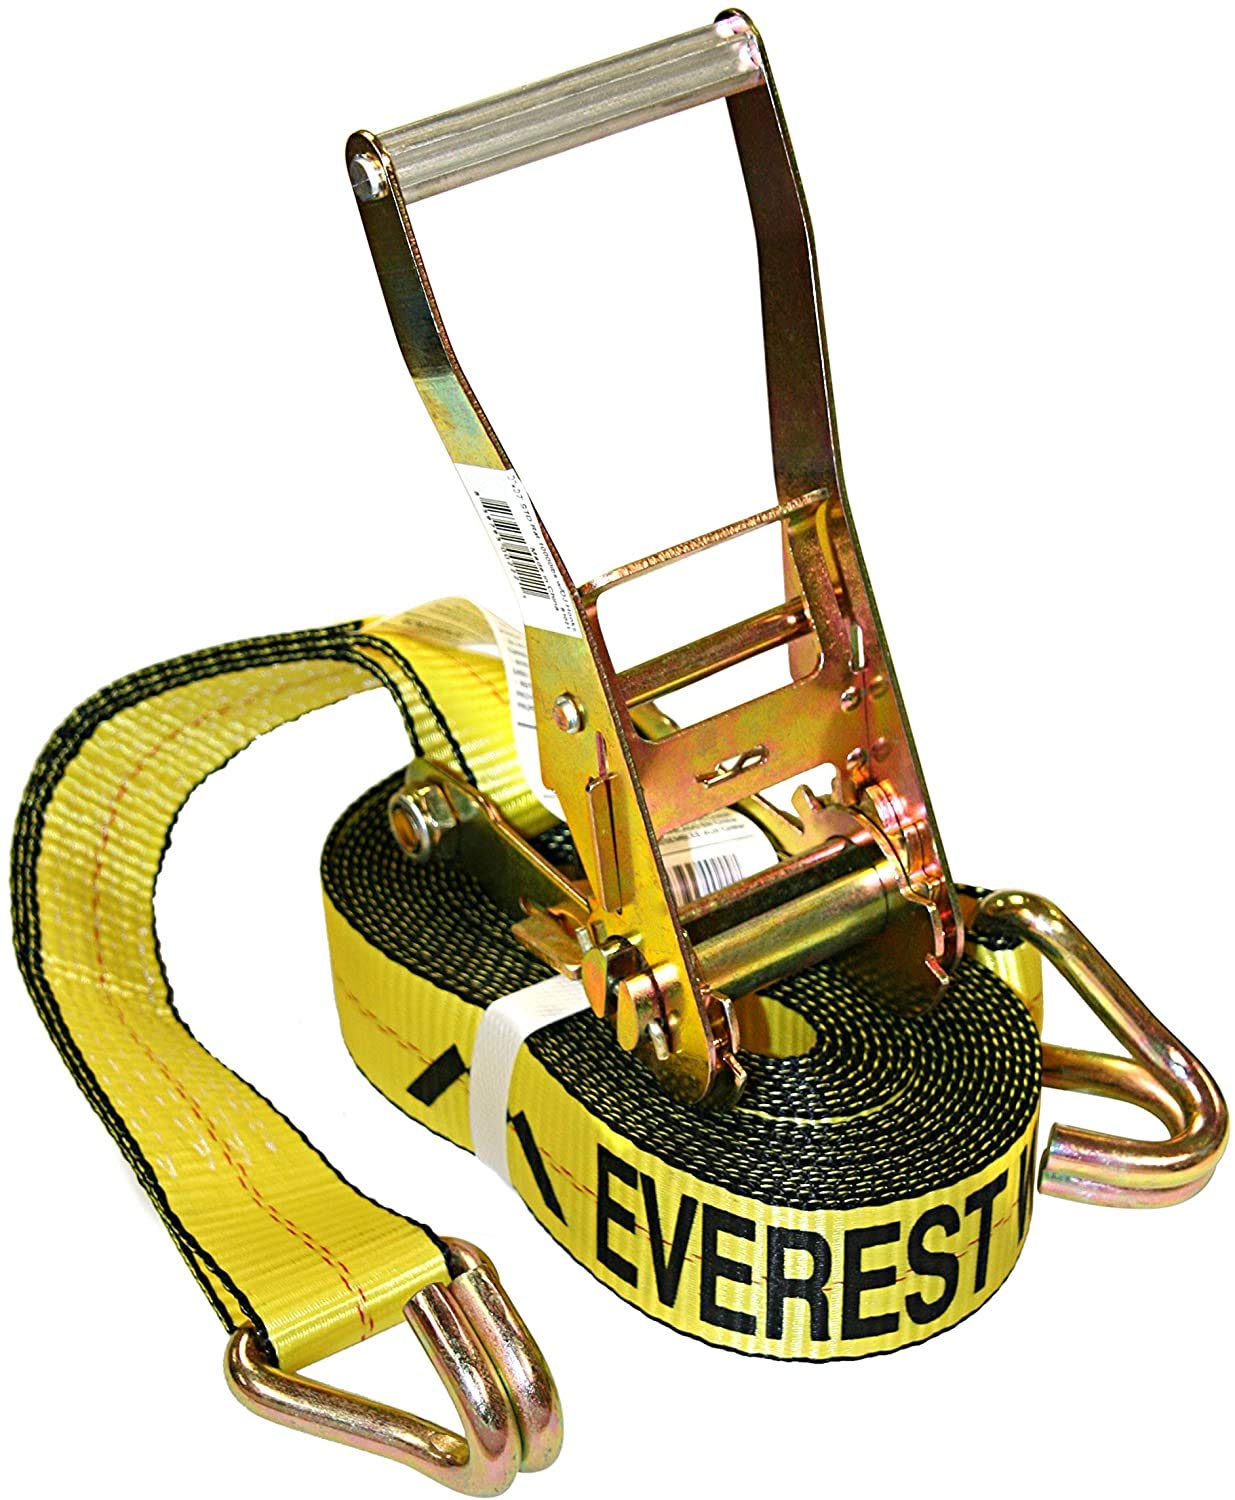 Everest Premium Ratchet Tie Down PK IN 27 FT 3333 LBS Working  Load 10000 LBS Break Strength Double J Hook Cargo Straps Perfect for Moving  Appliances, Lawn Equipment and Motorcycles